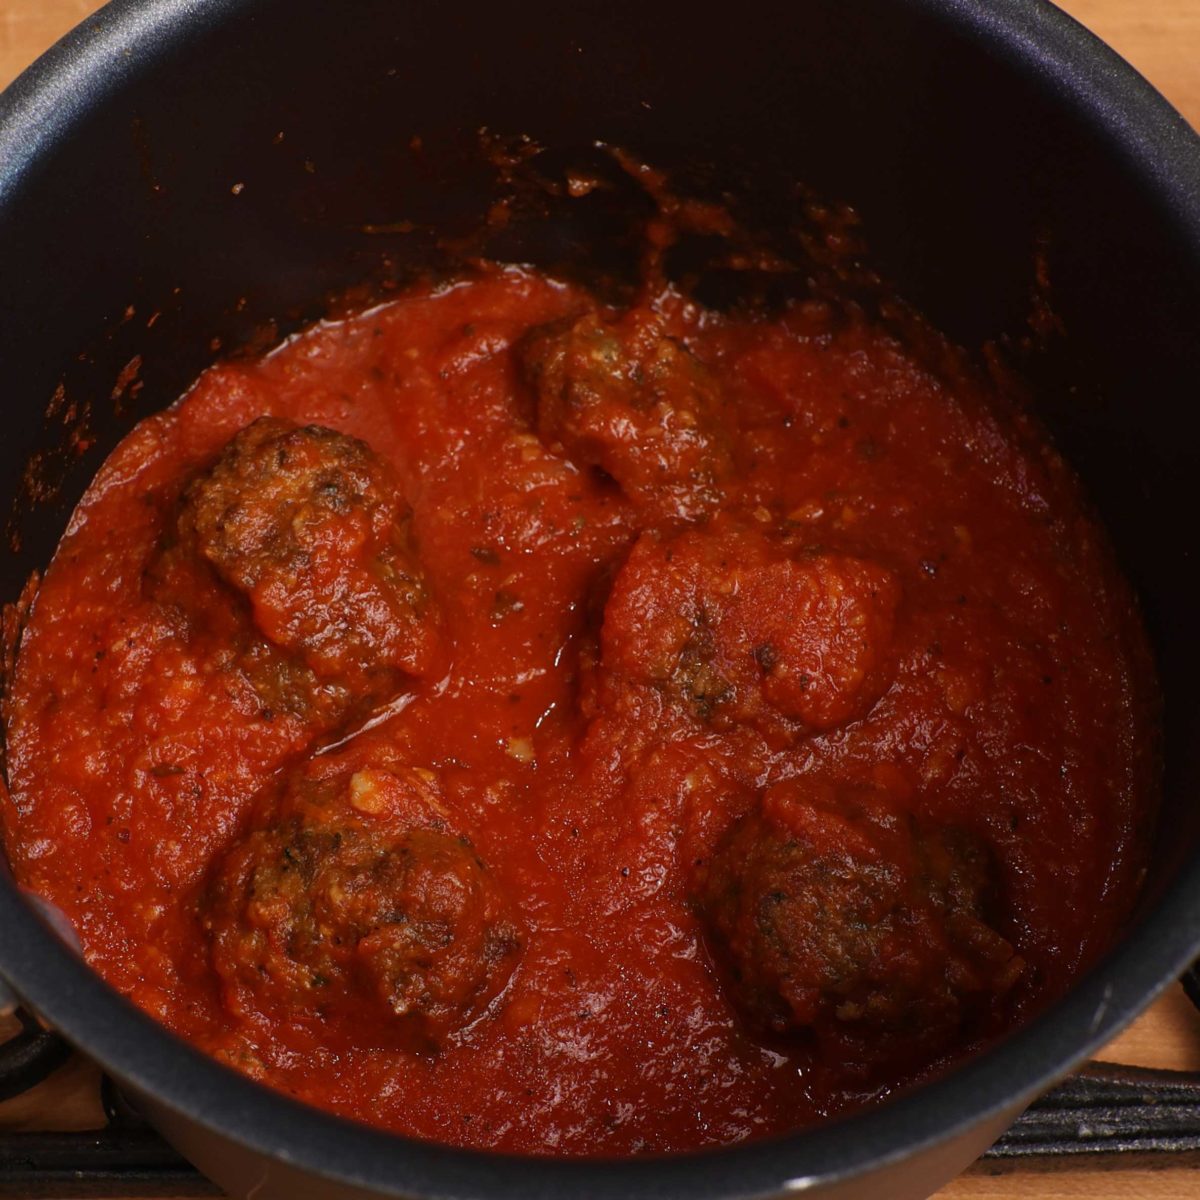 meatballs simmering in a pot of spaghetti sauce.